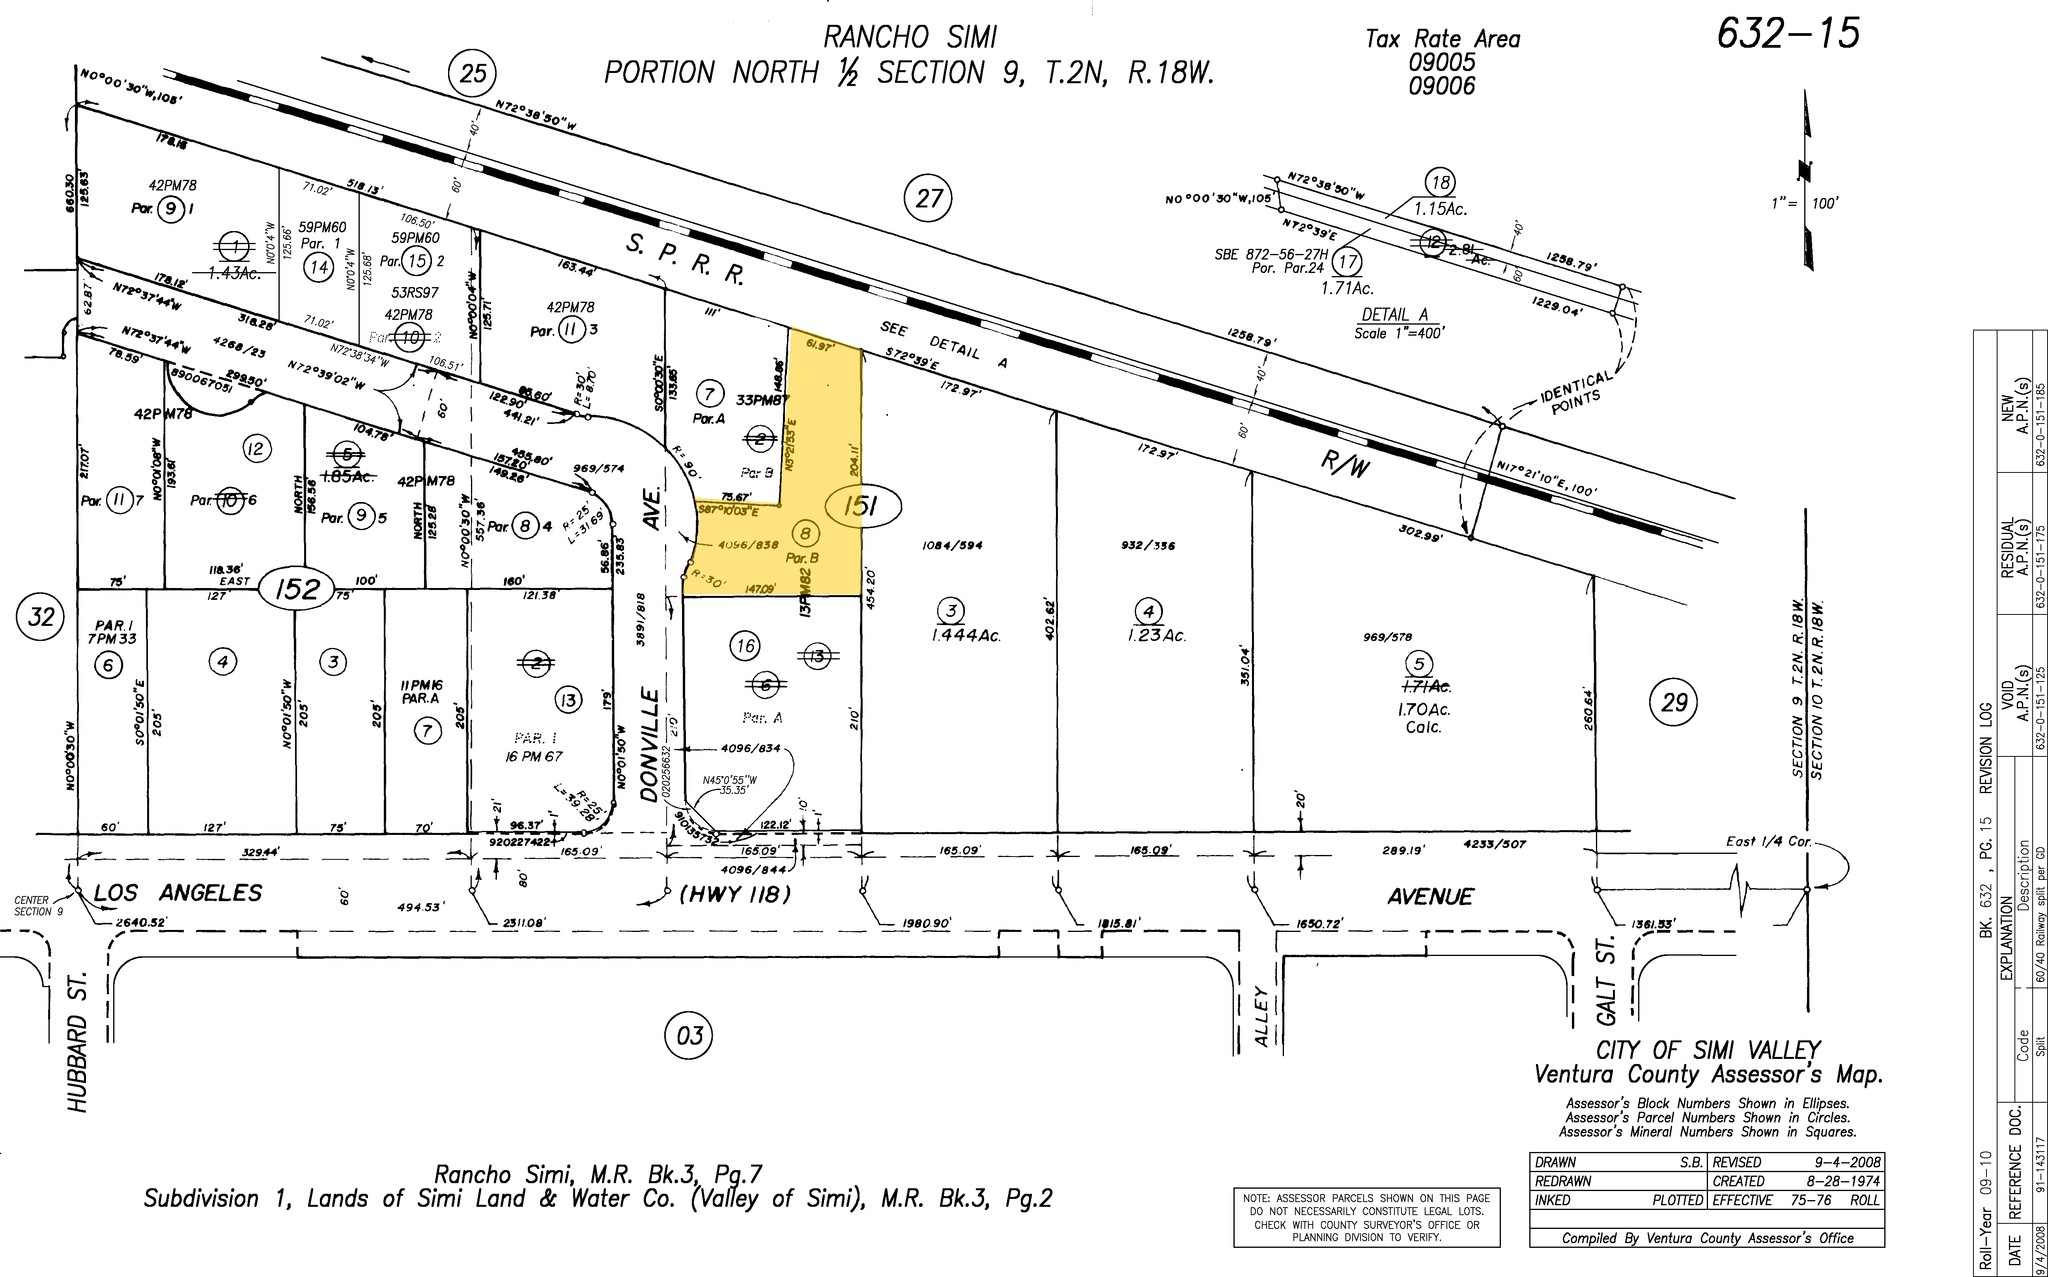 448-2001-donville-ave-simi-valley-ca-plat-map-3-largehighdefinition3-16770271973059.jpg